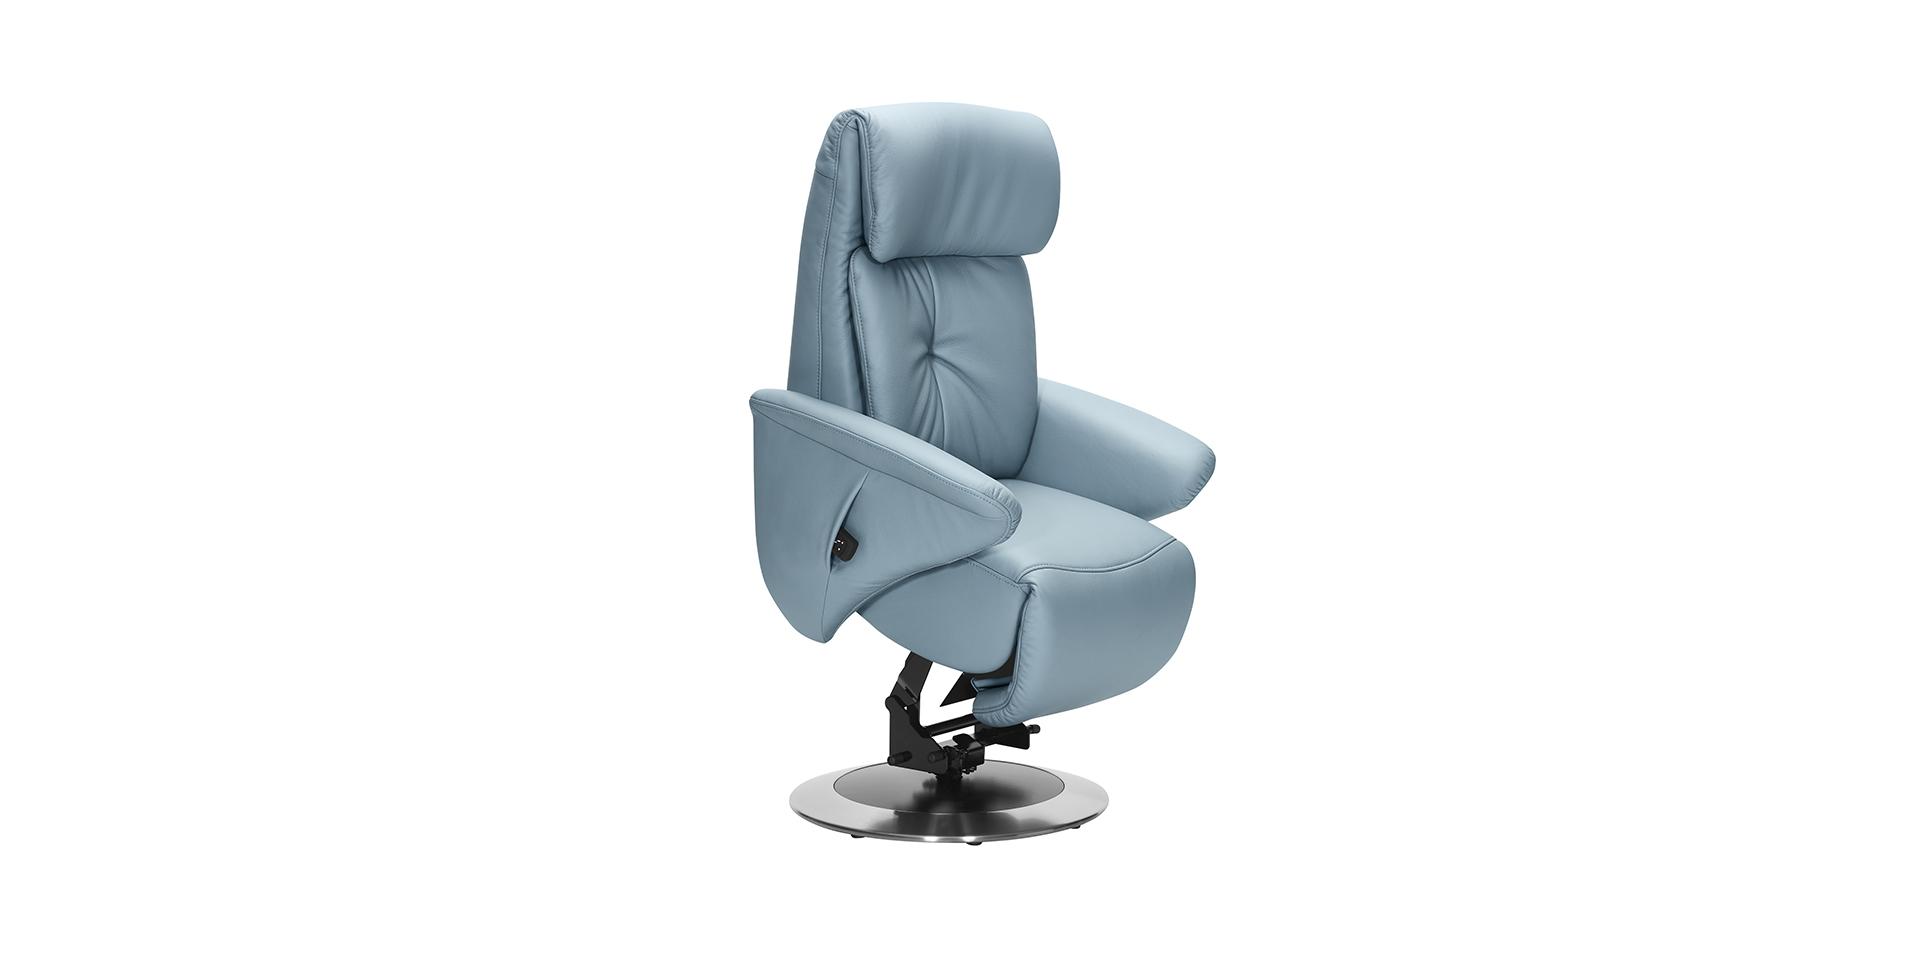 Slider Fauteuil relaxation 7341 (image 8)